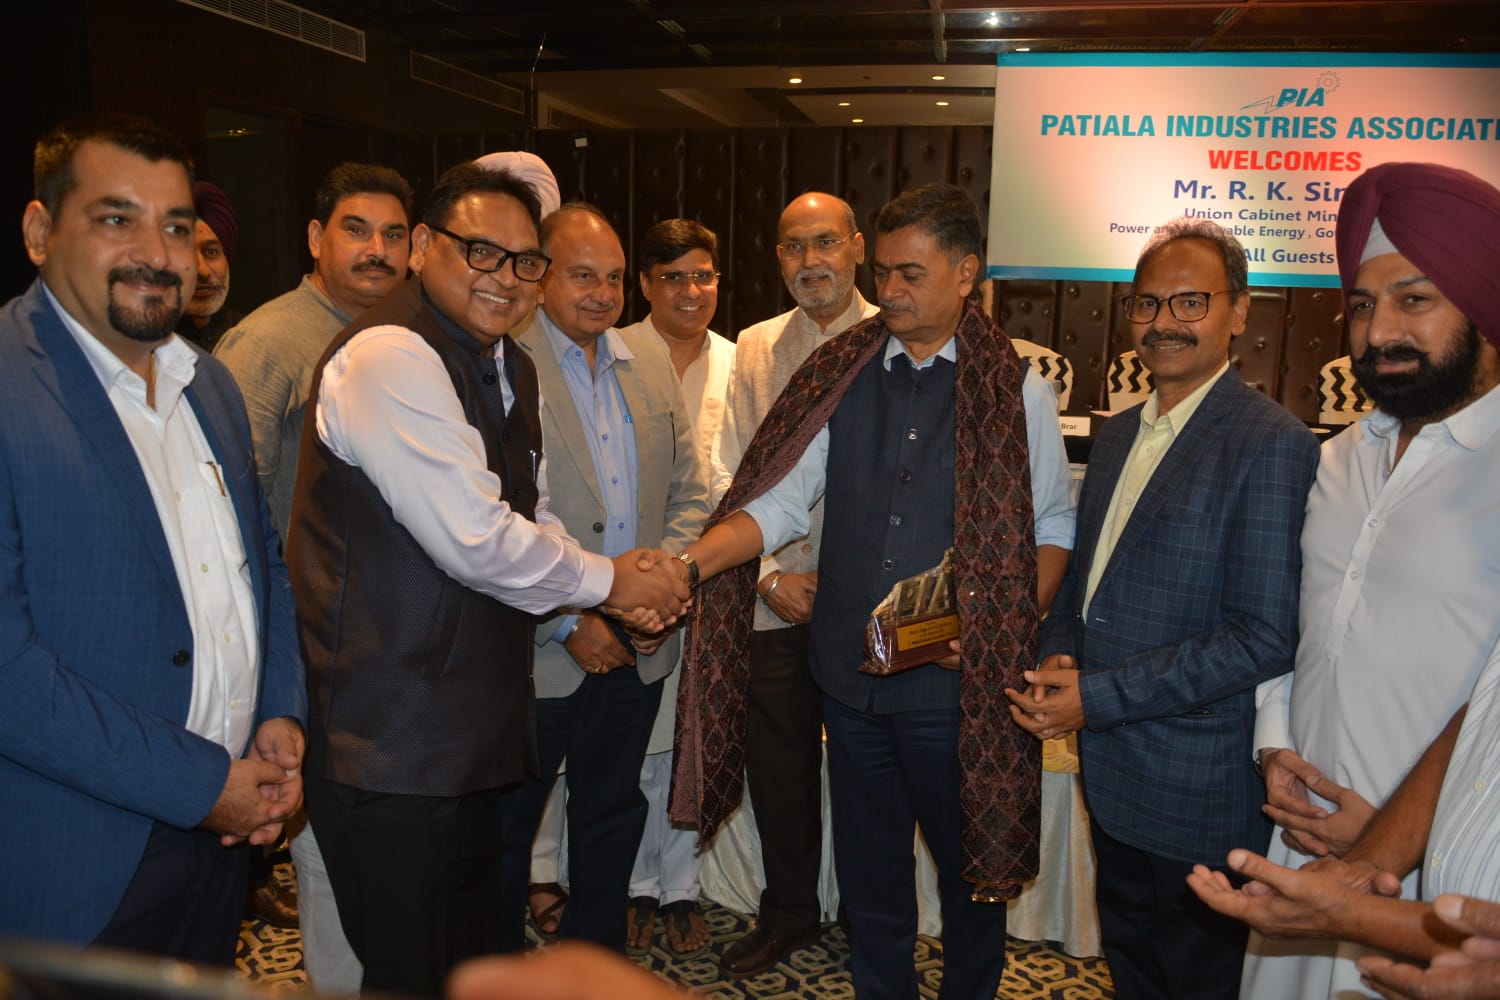 Red Letter Day in the history of Patiala Industries Association; hosted Union Power Minister in Patiala